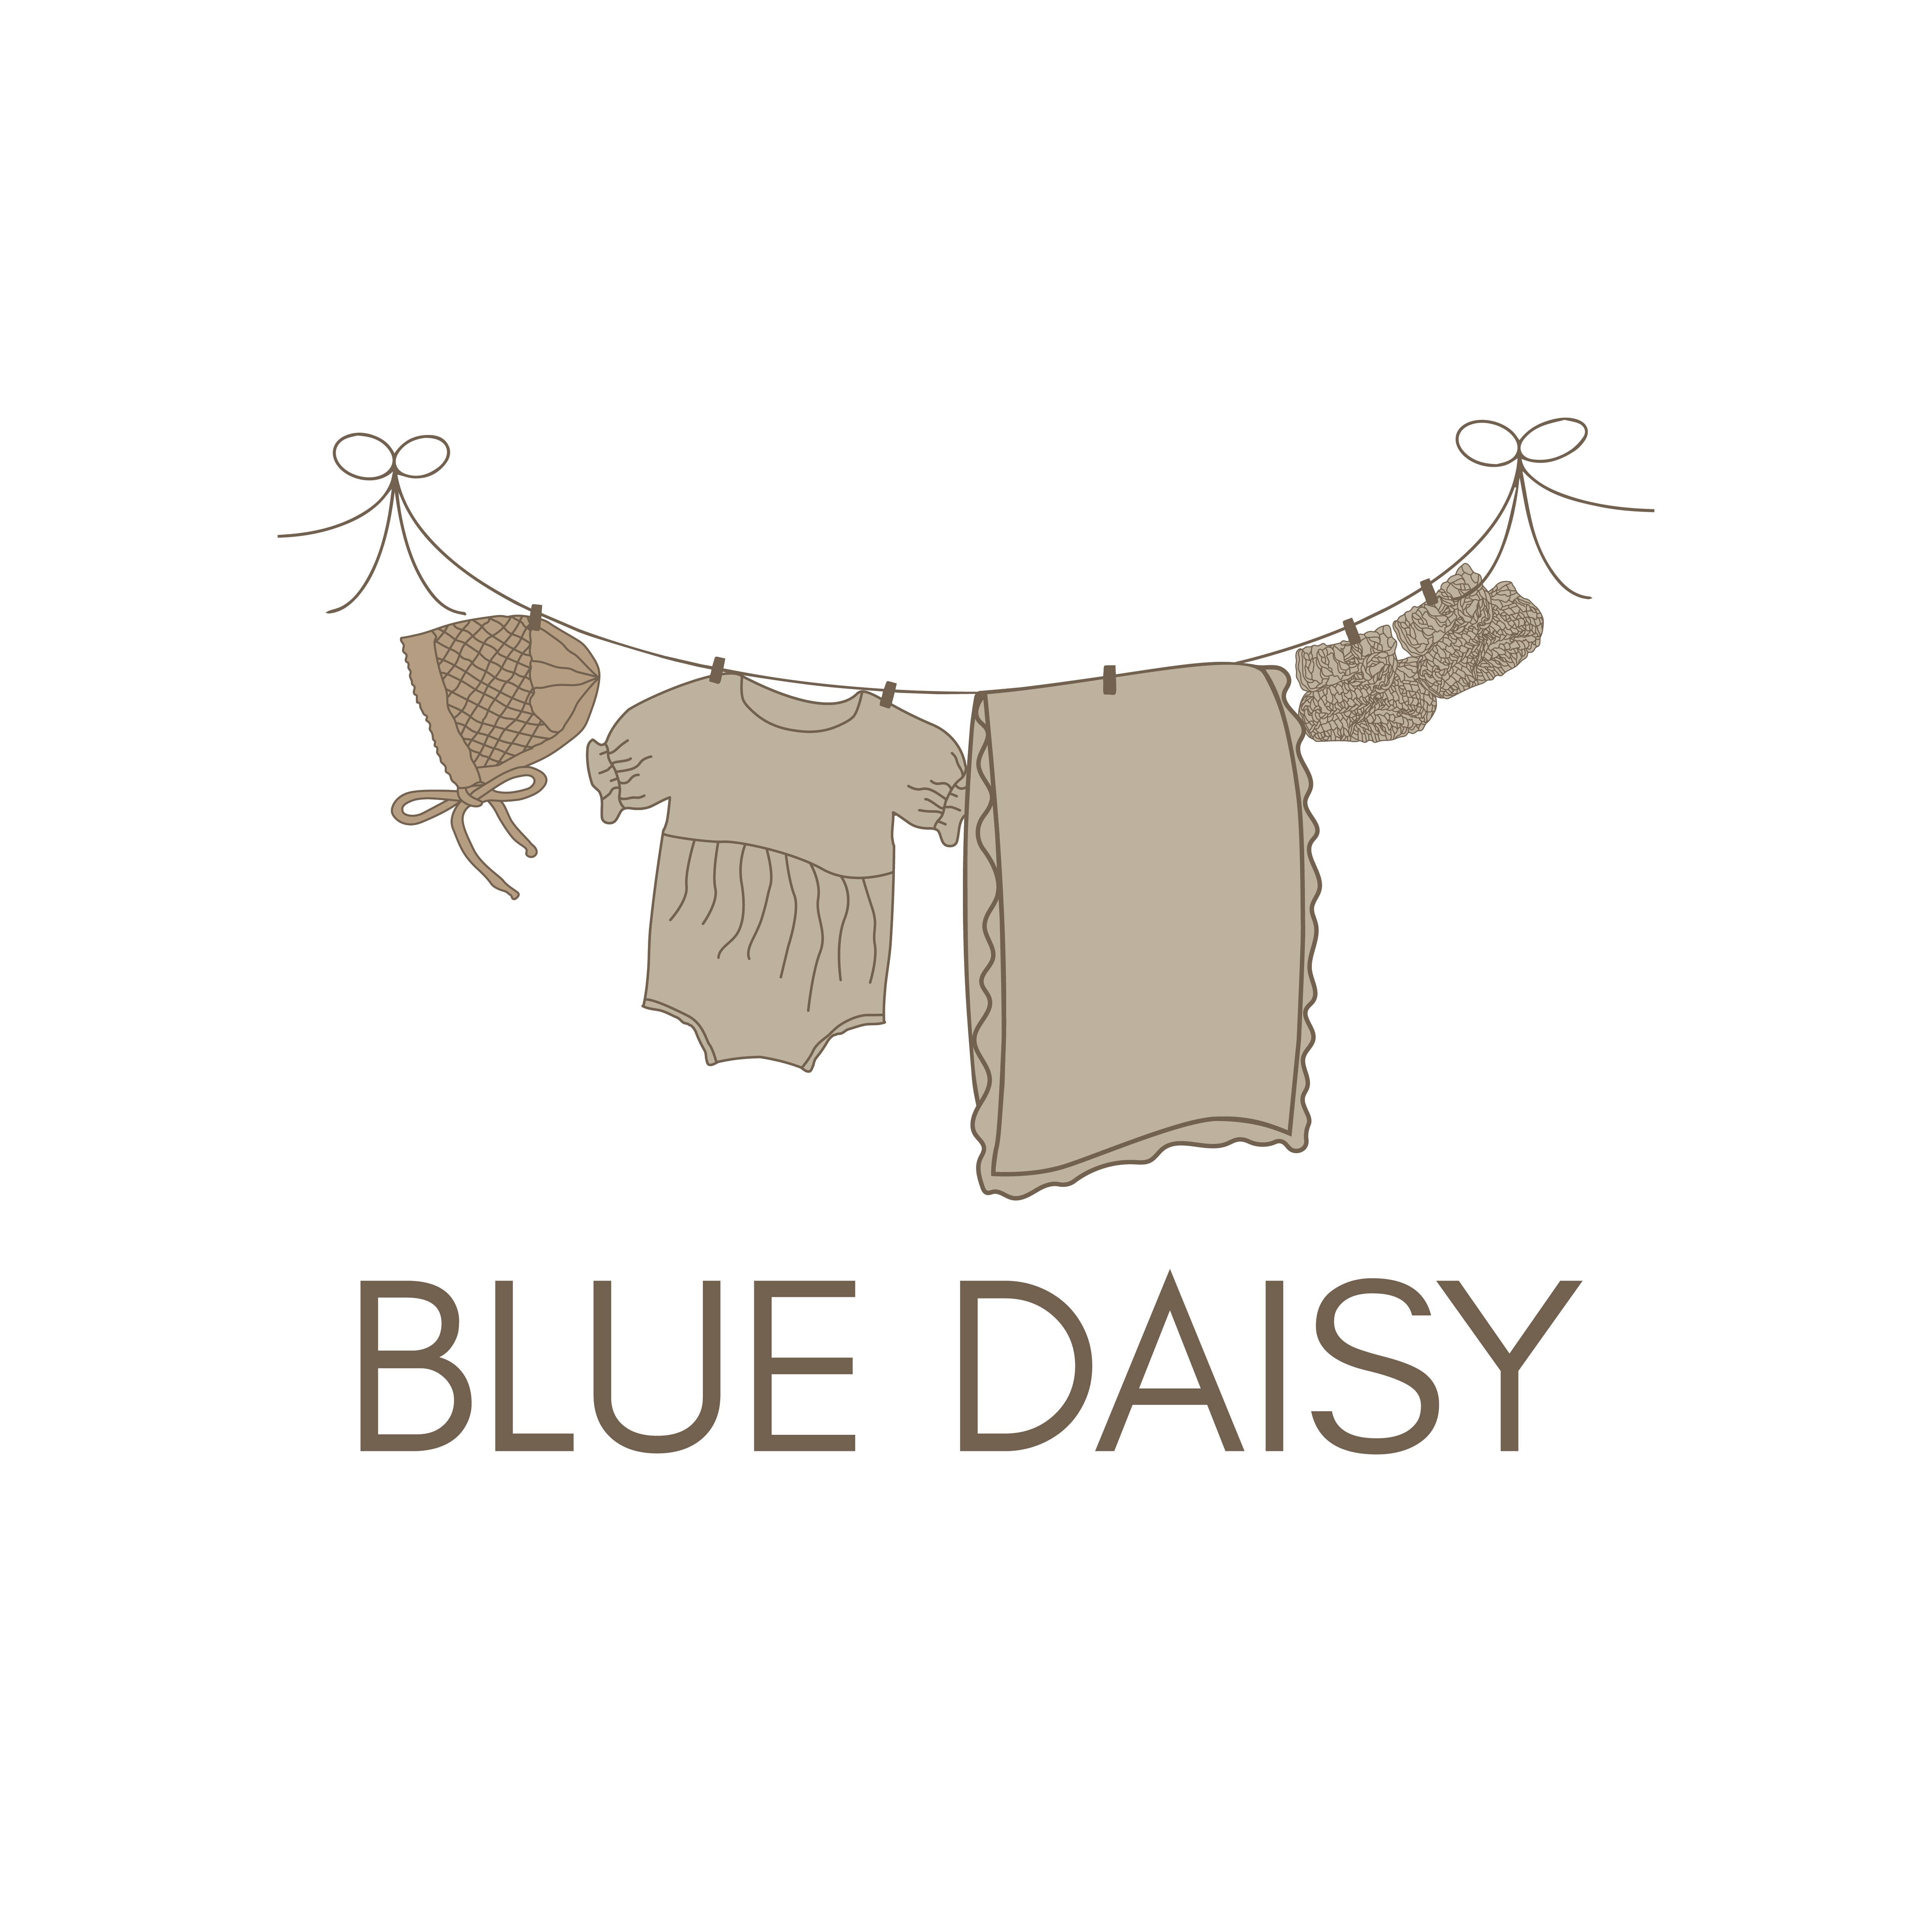 Daisy wholesale products